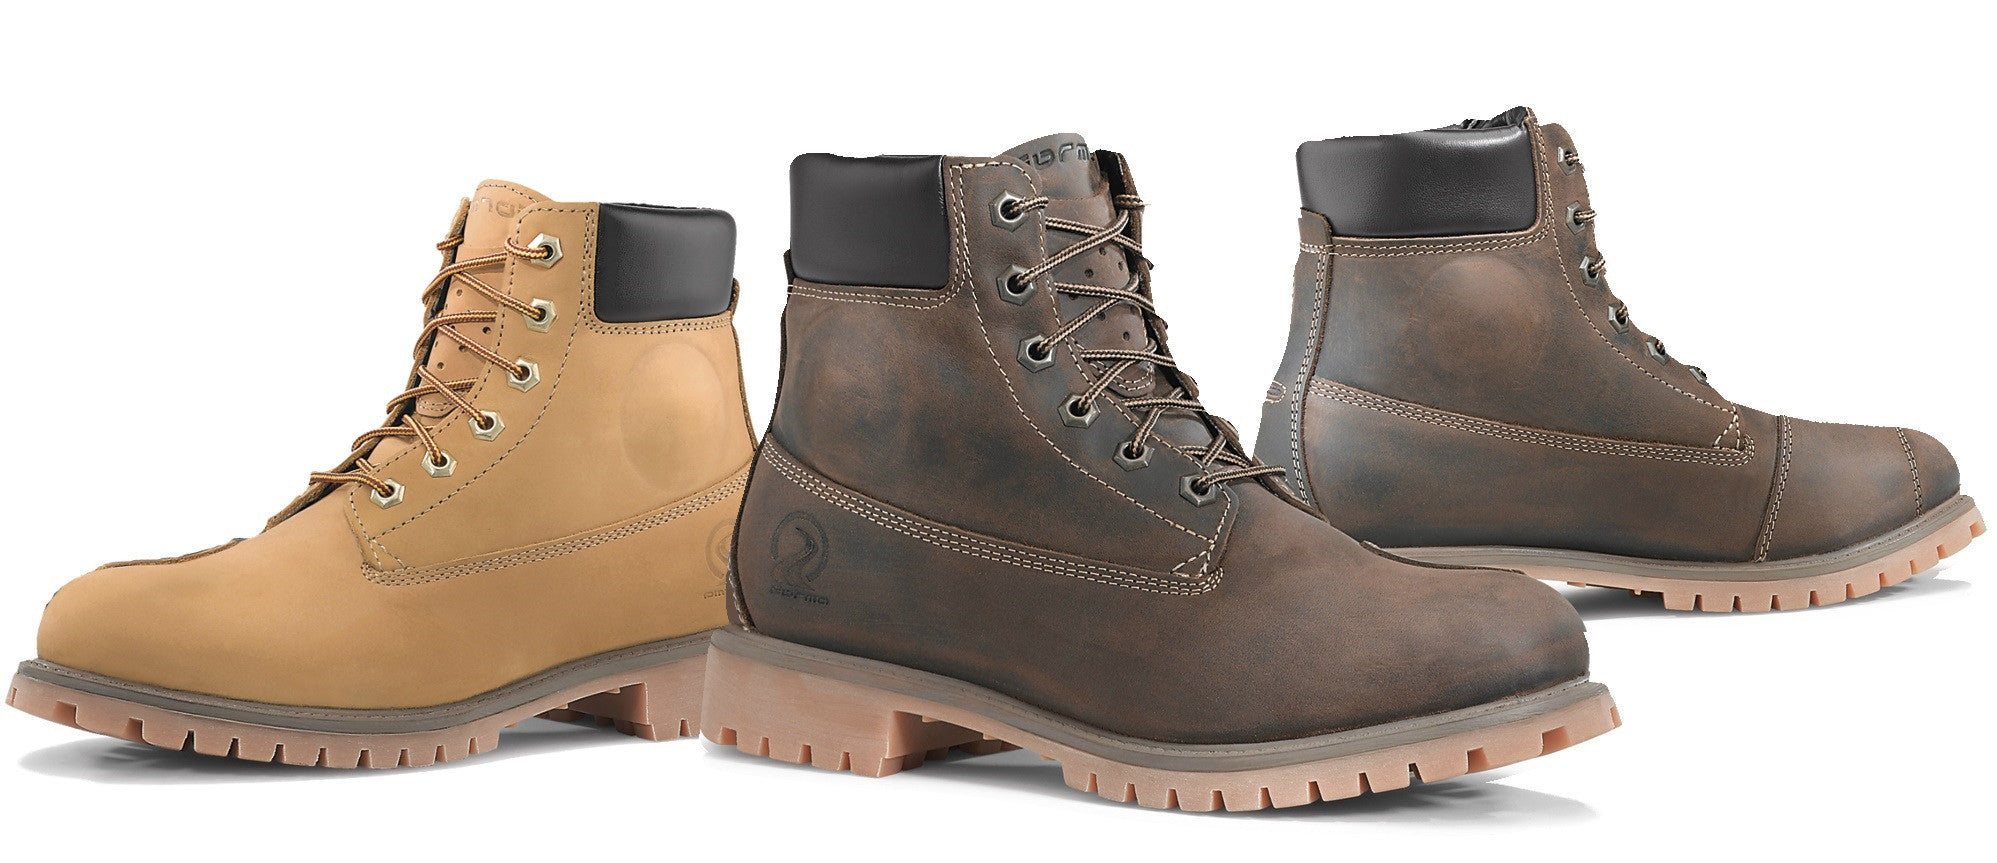 Forma Elite motorcycle boots, brown gold timberland footwear